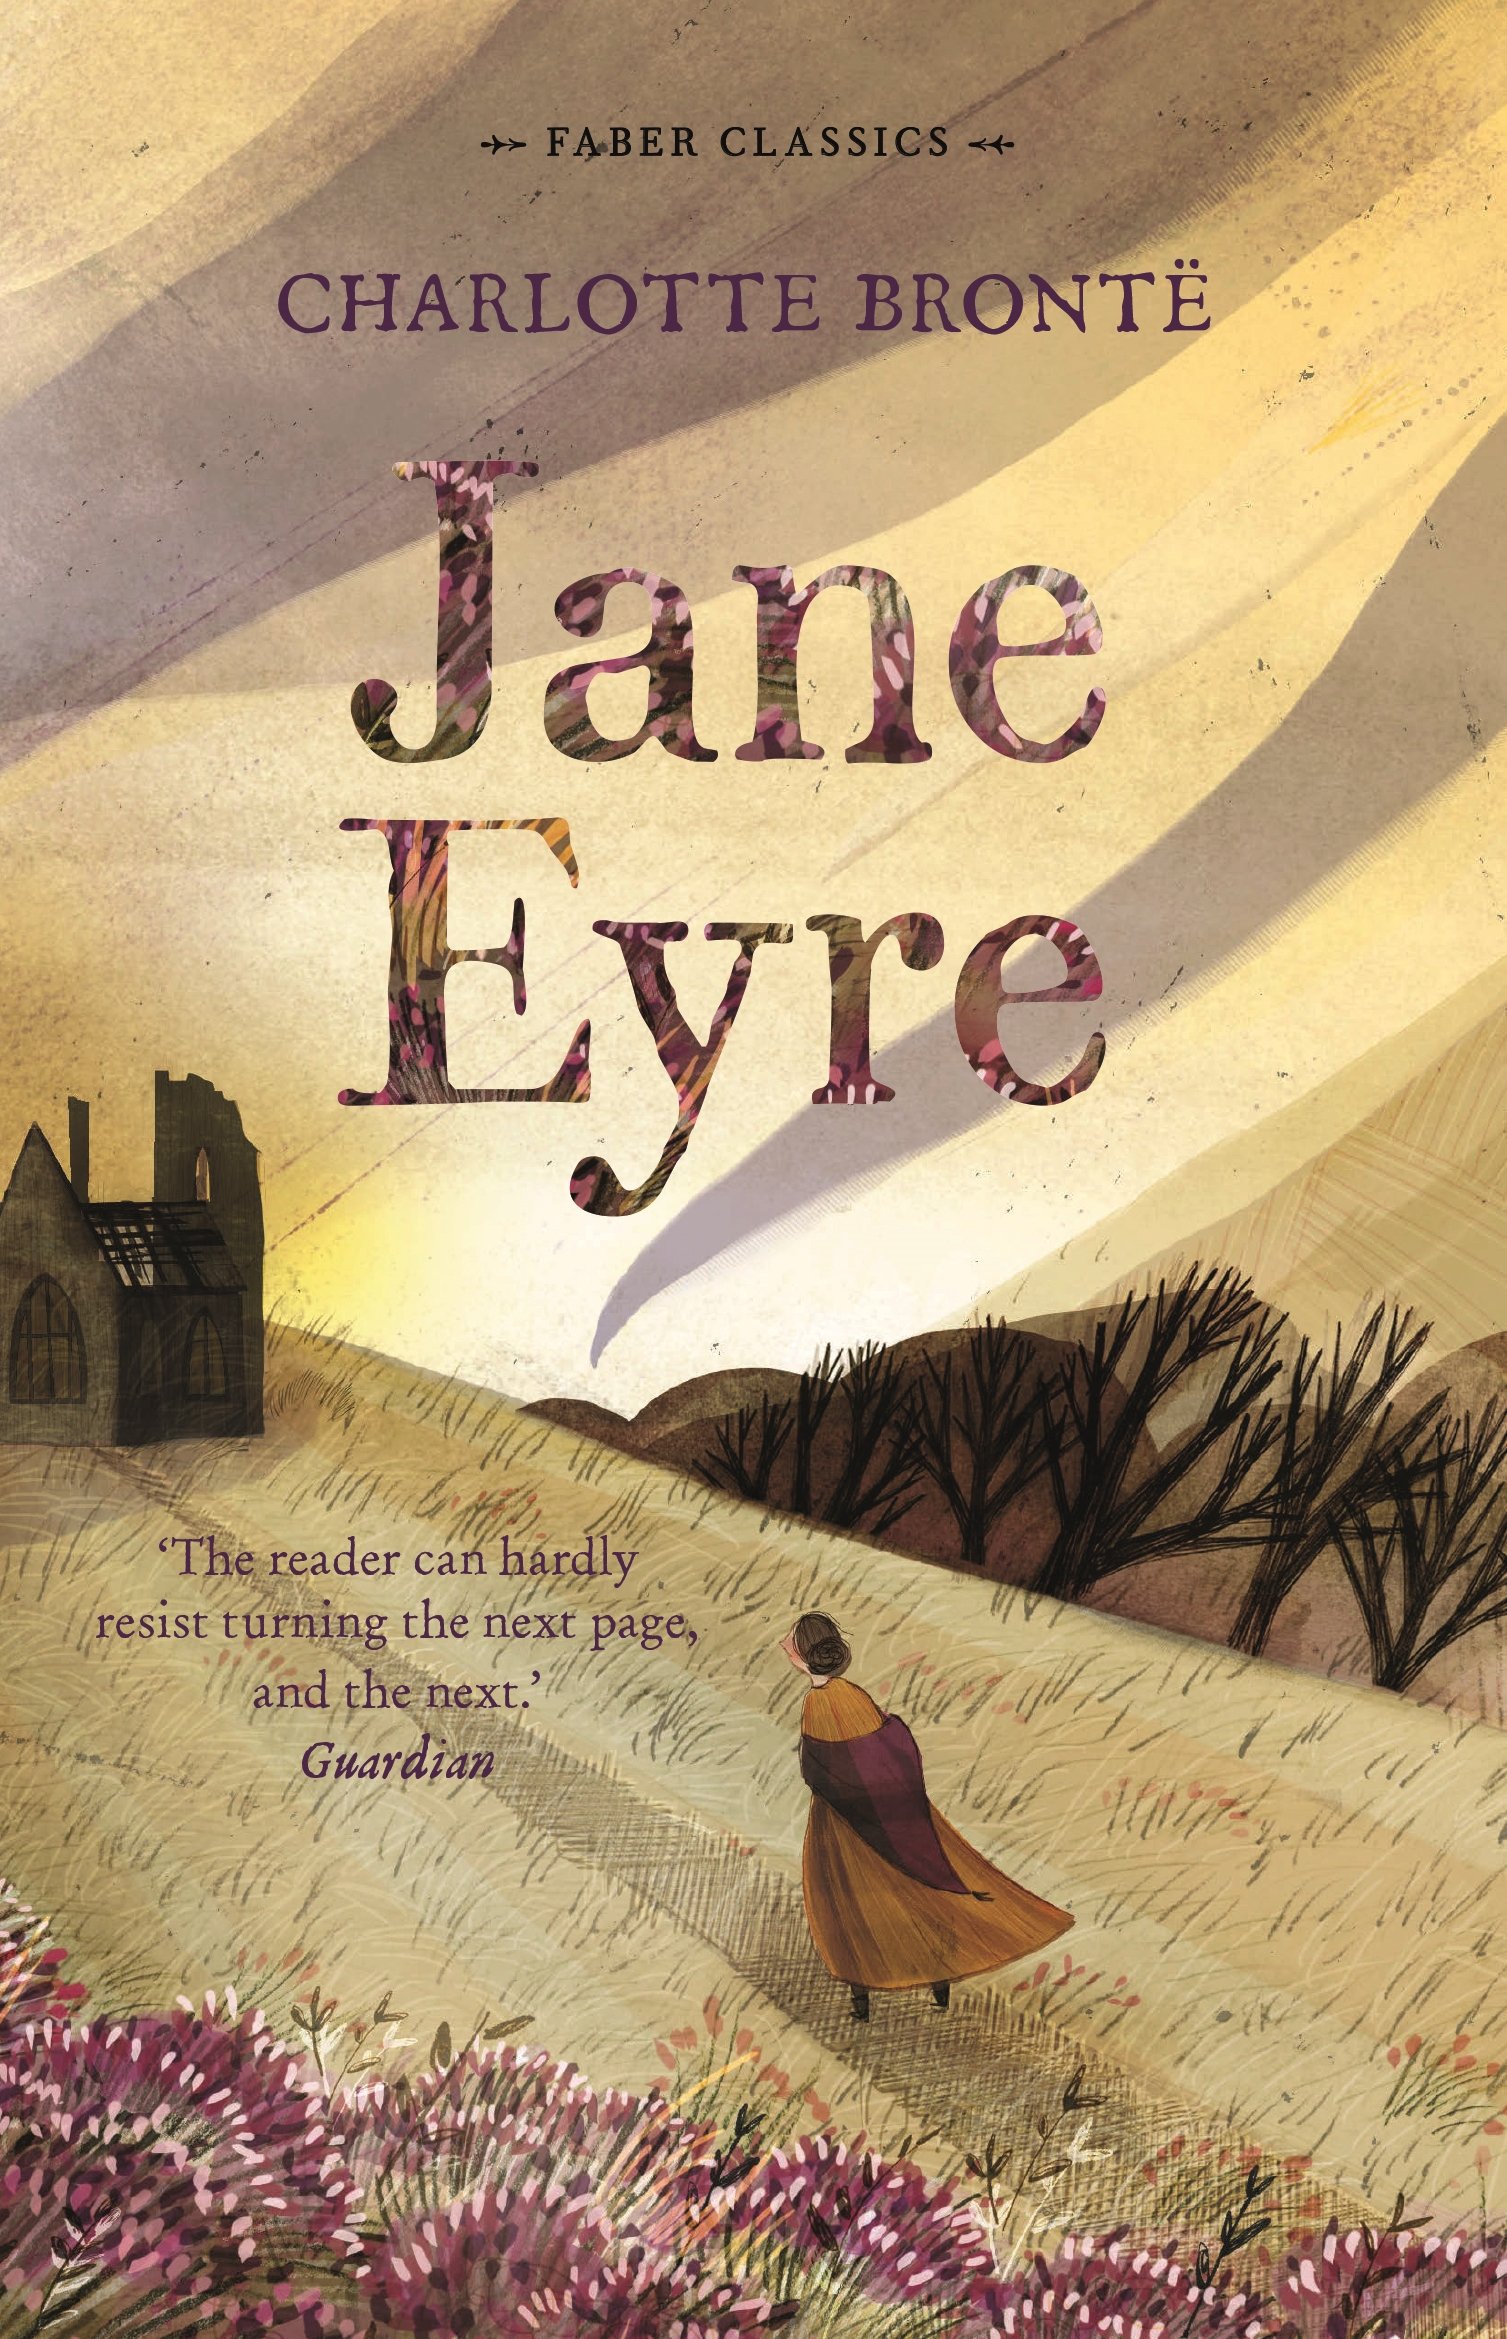 MY REVIEW OF JANE EYRE BY CHARLOTTE BRONTE